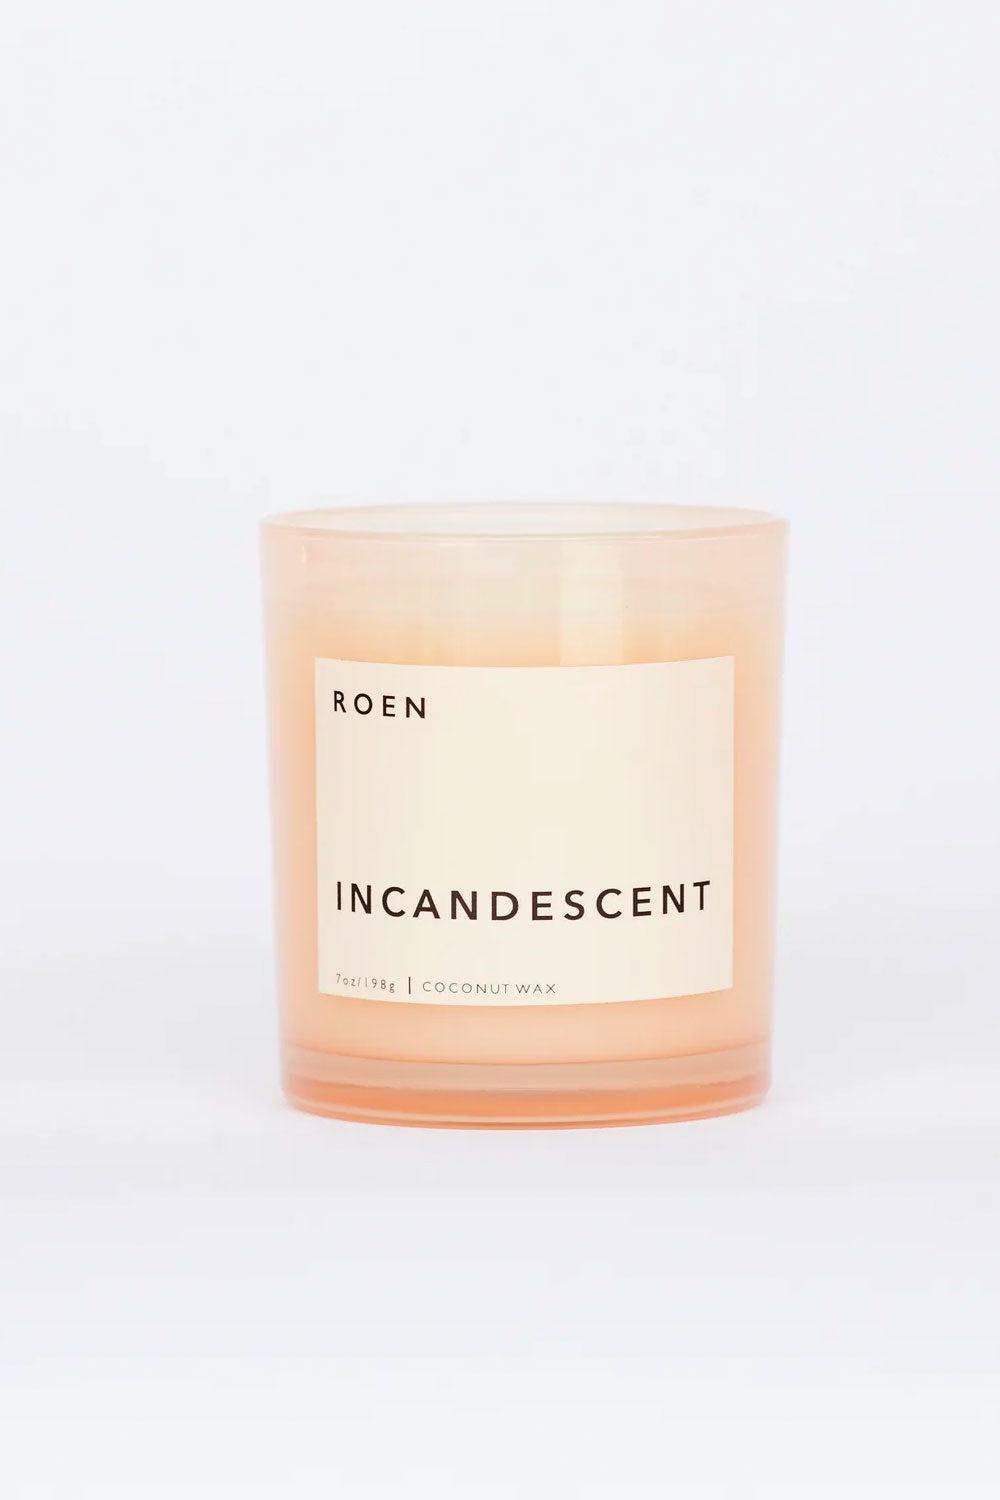 INCANDESCENT Candle